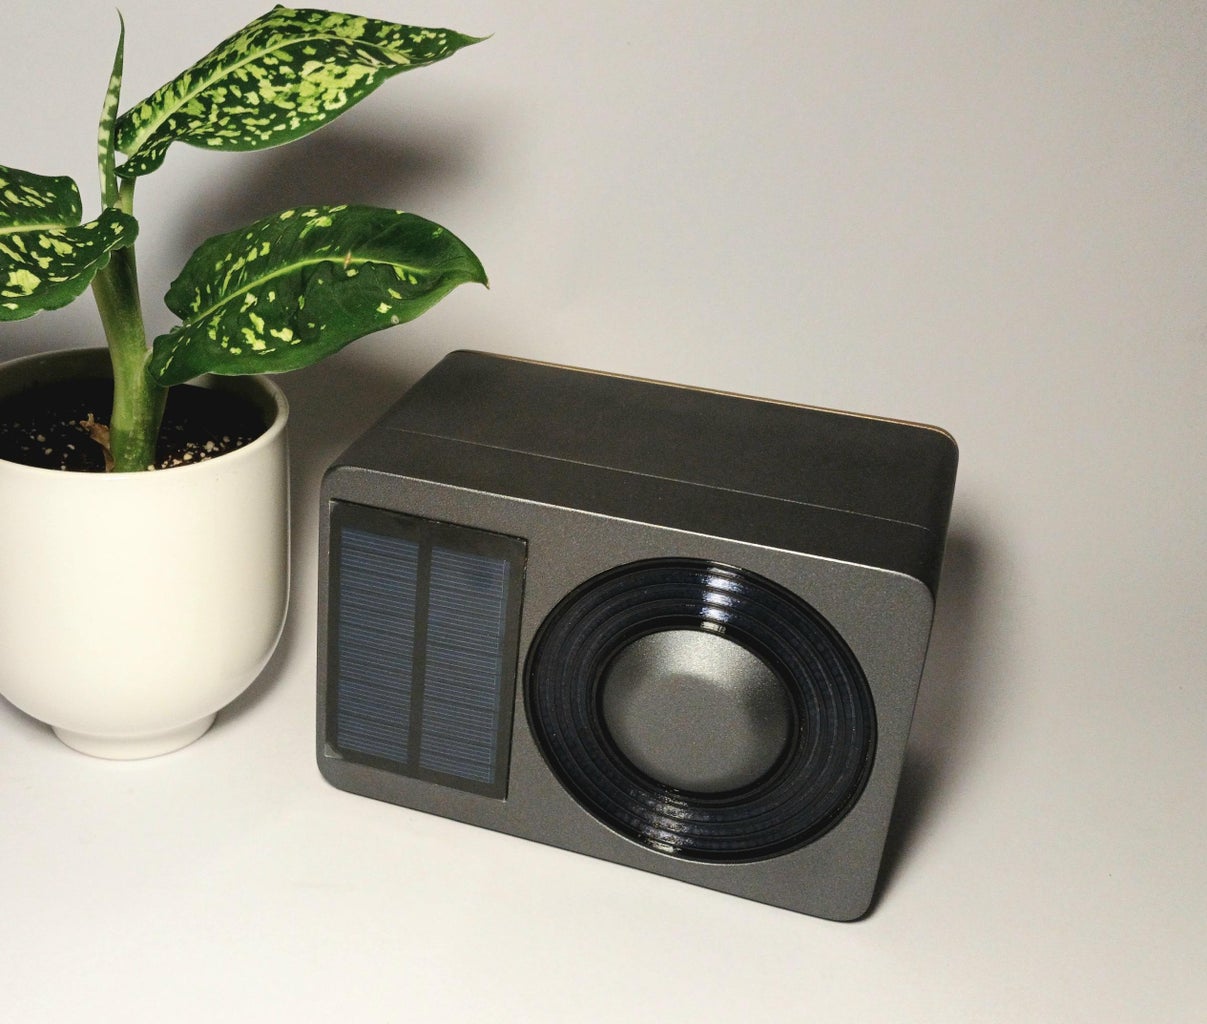 Build a Supercapacitor Powered Speaker!